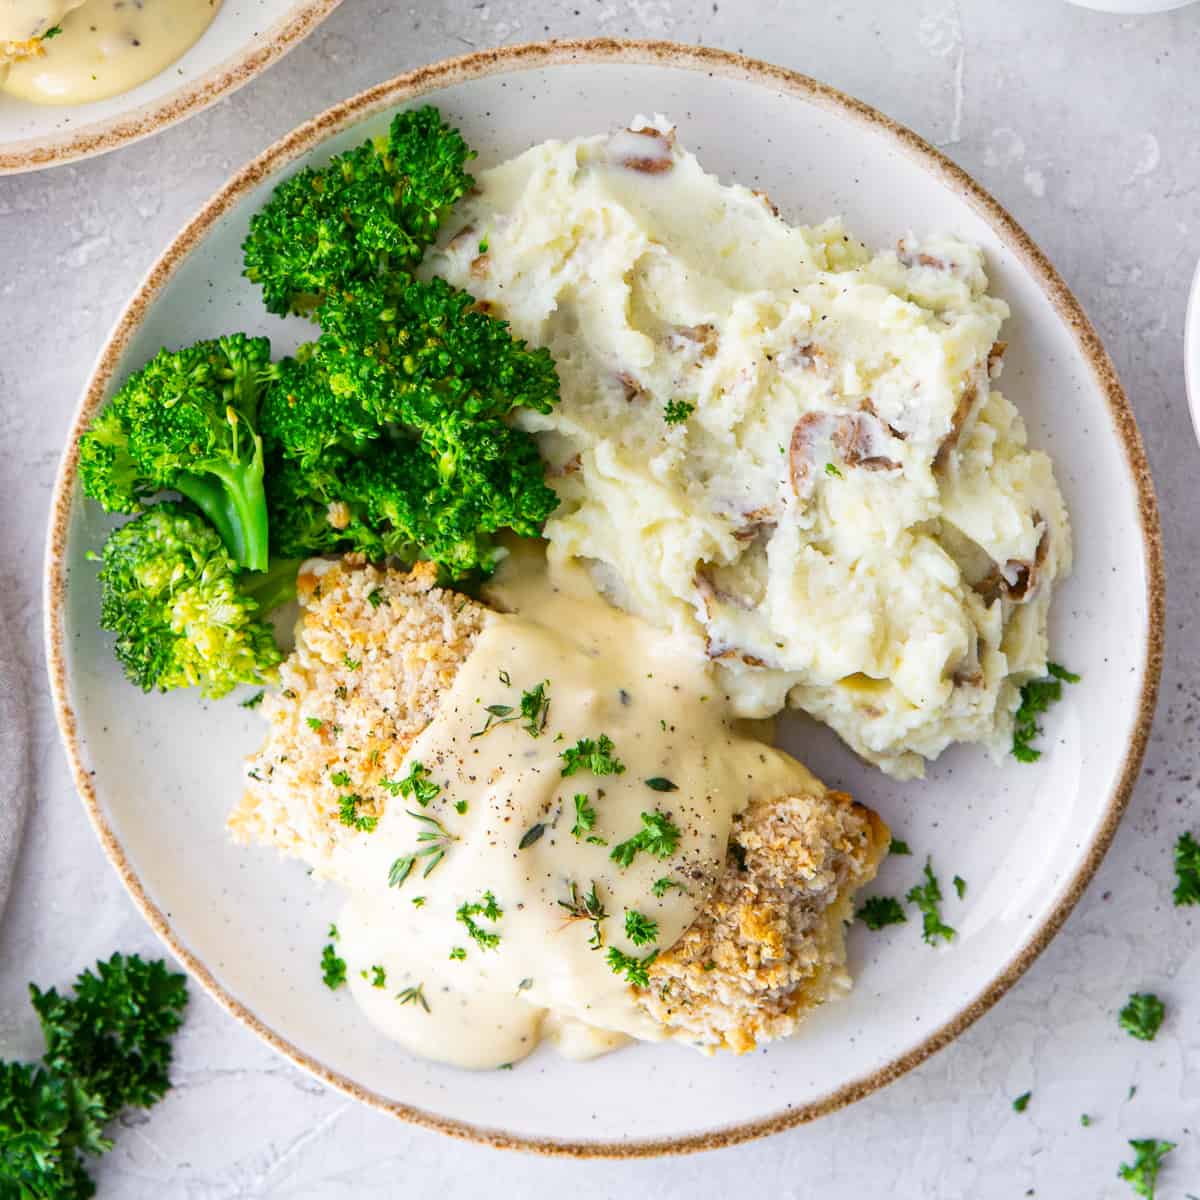 A top down close up shot of chicken with a creamy sauce on plates with mashed potatoes and broccoli.